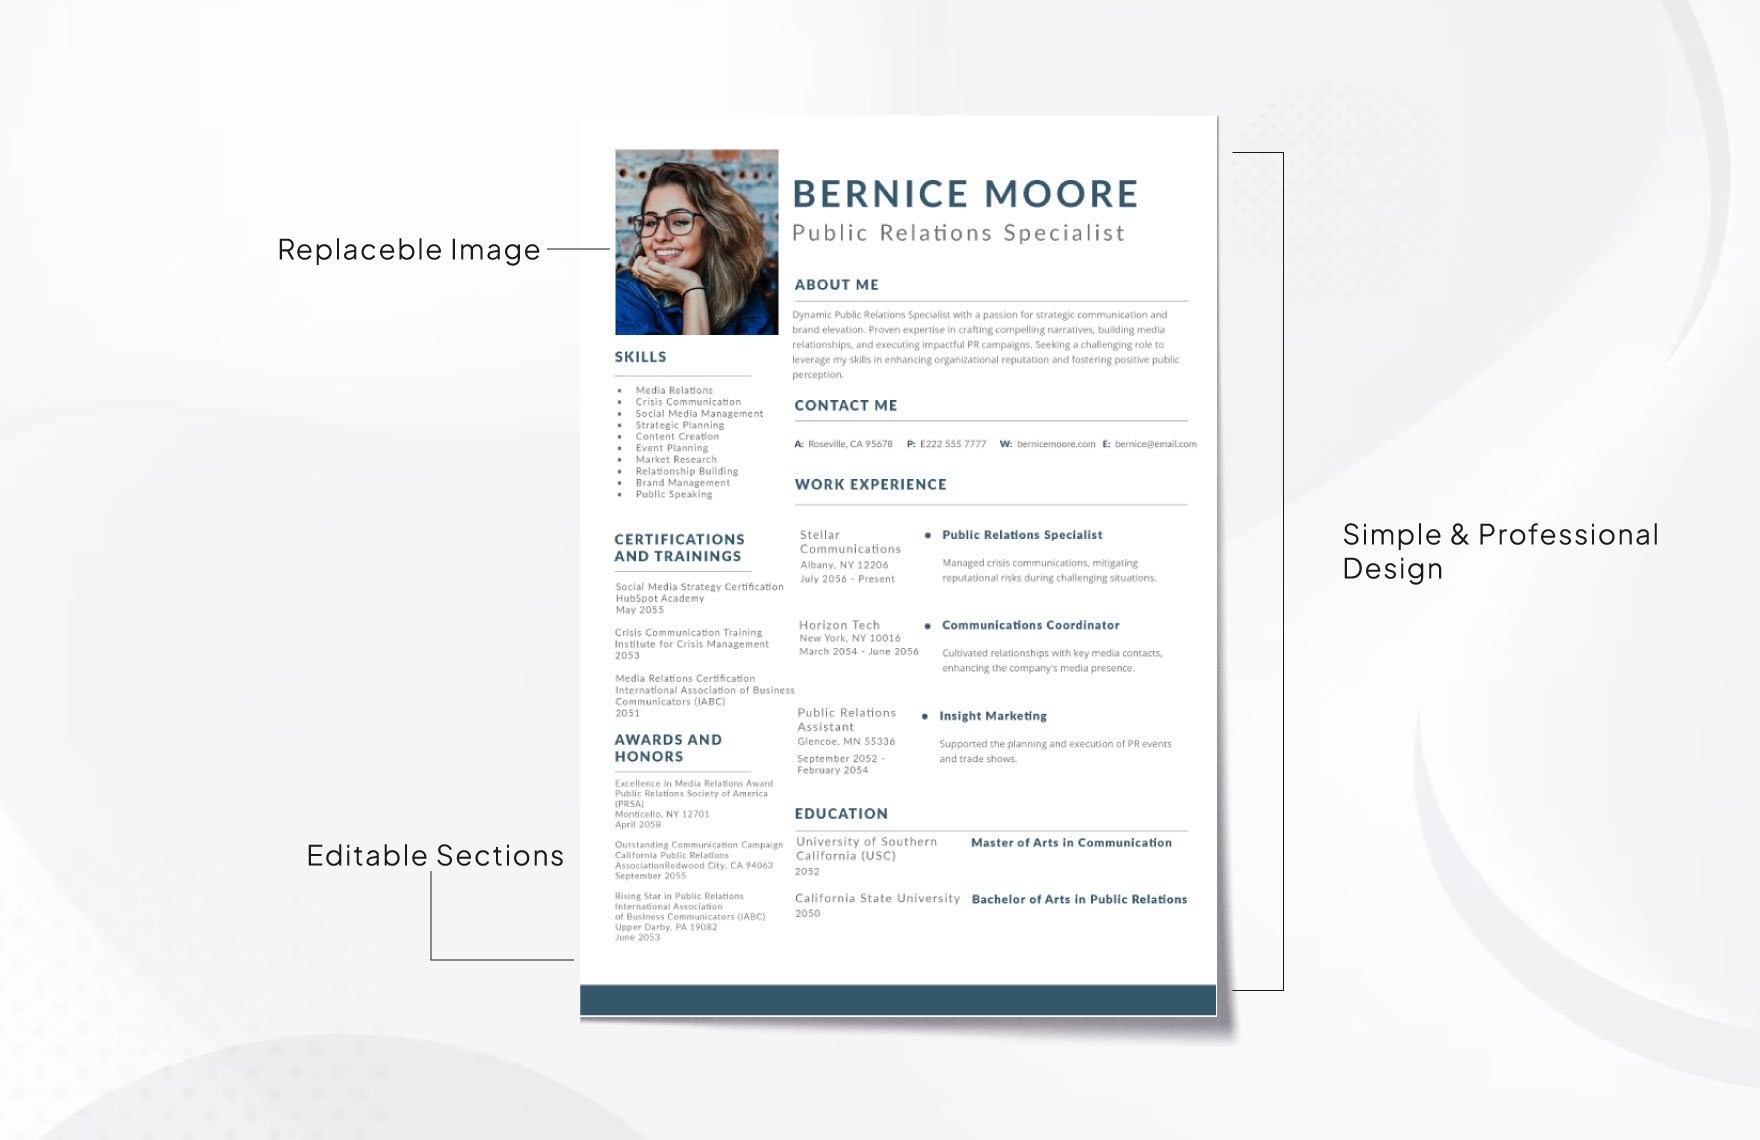 Resume for Macbook Template